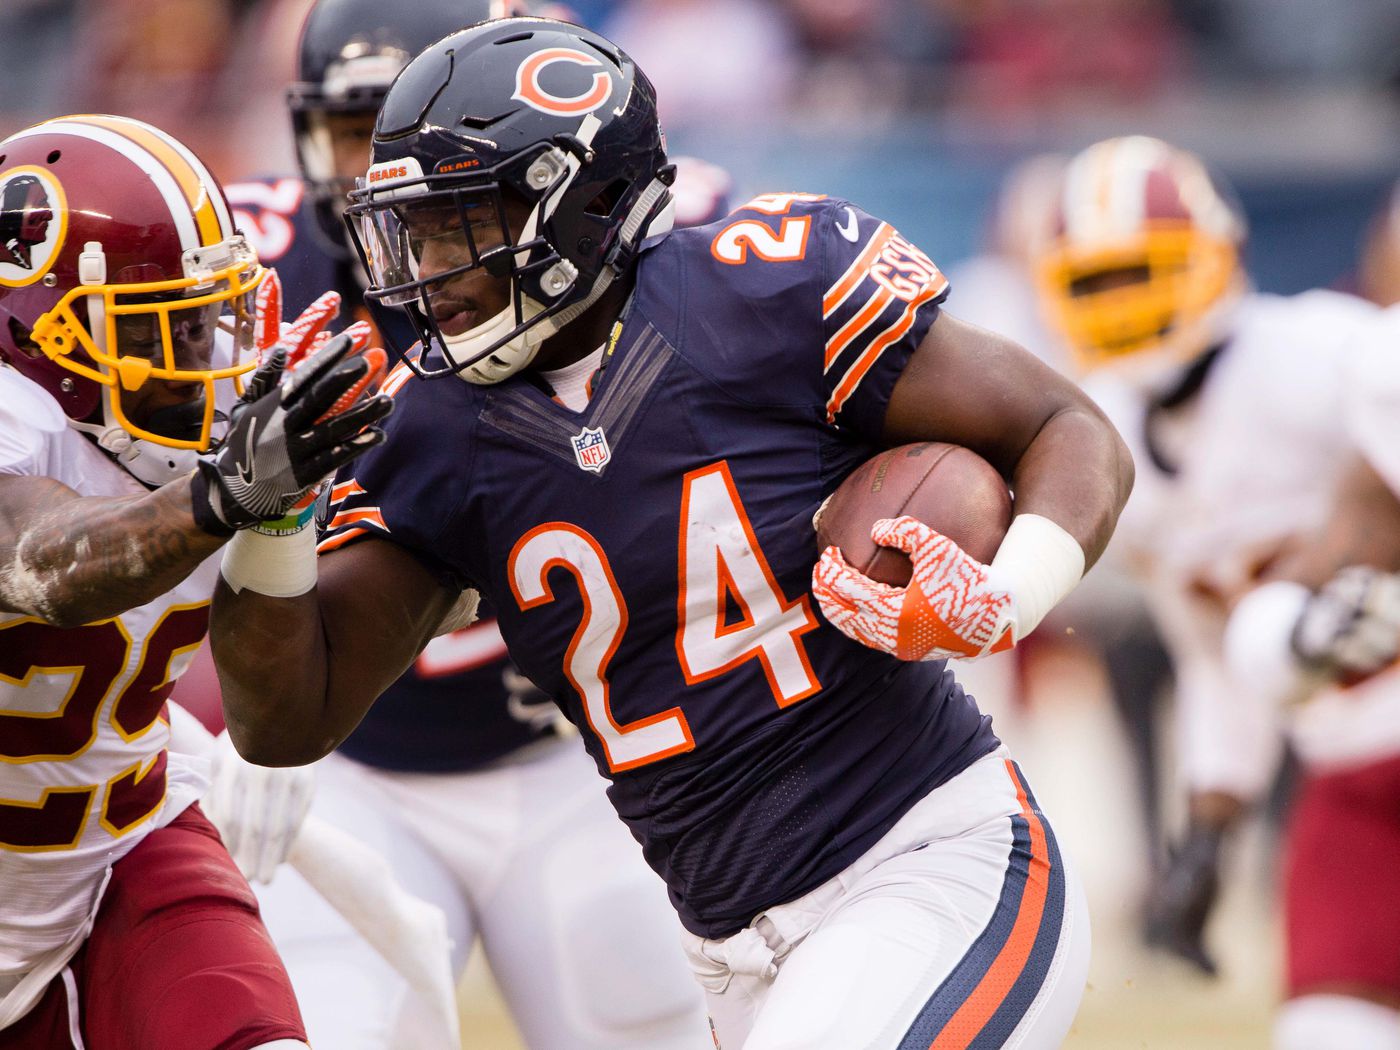 Jordan Howard will be the best thing about the Bears in 2017